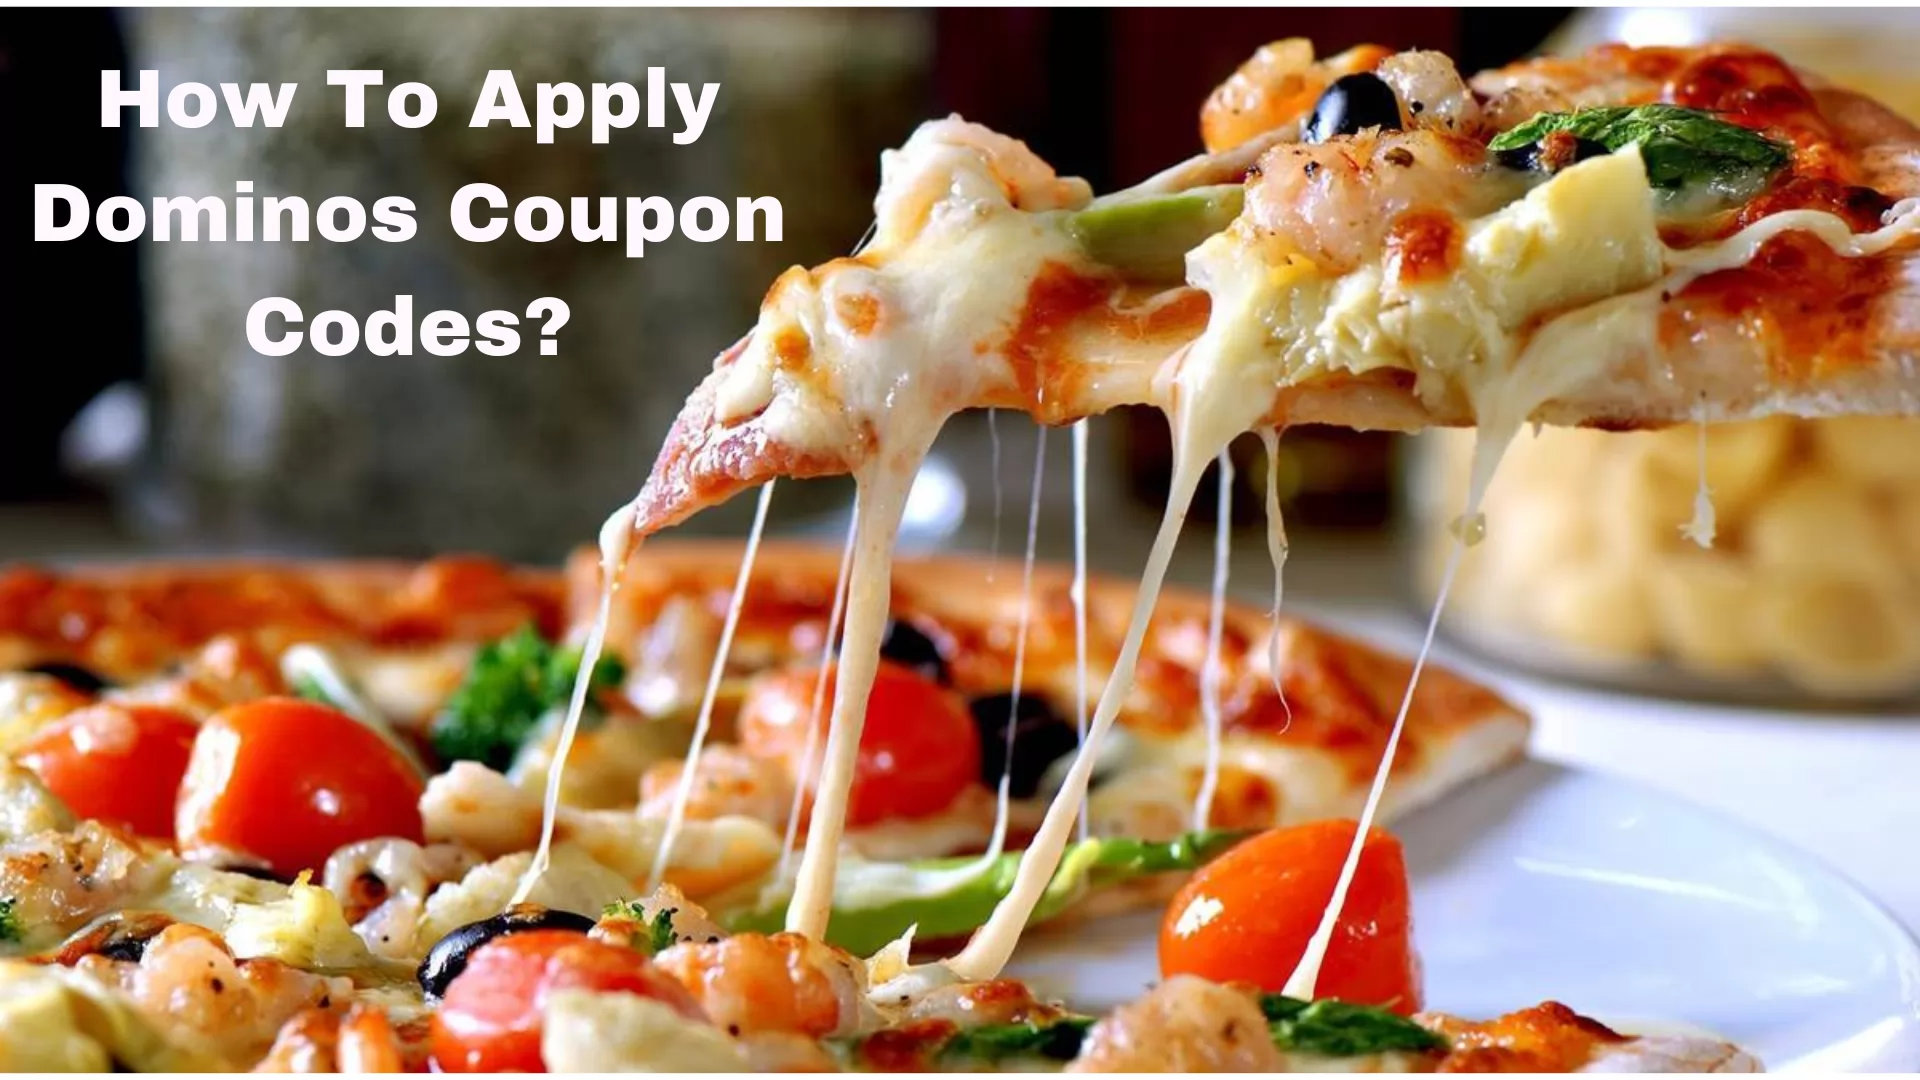 How To Apply Dominos Coupon Codes?